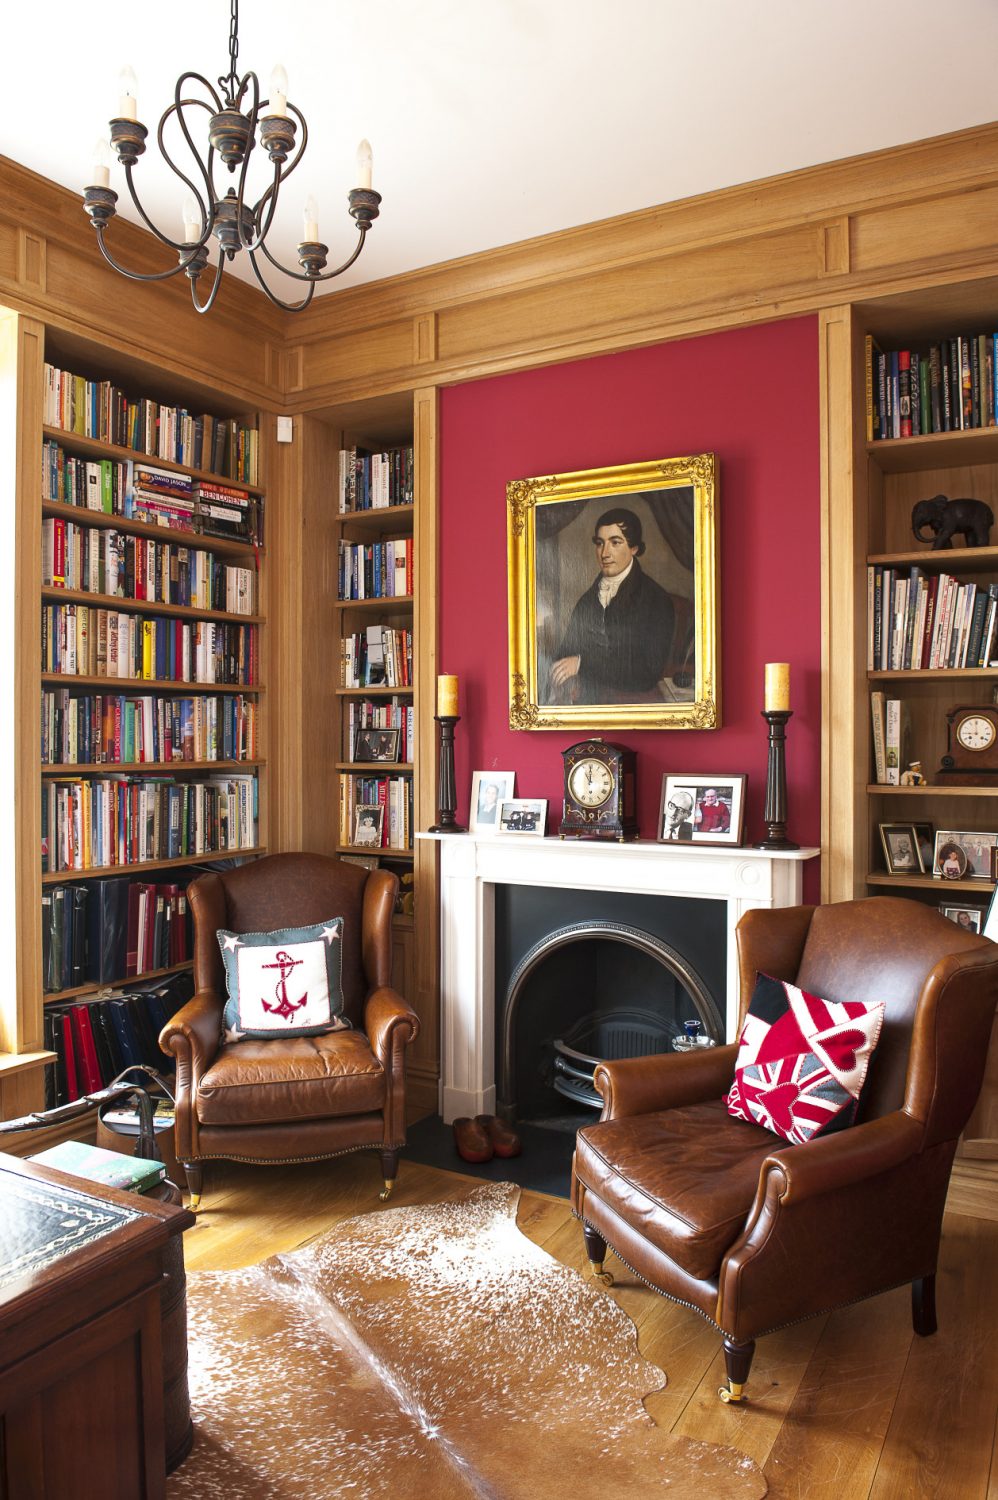 The study is painted in Farrow & Ball Chinese Red, a striking colour that really works and is the perfect backdrop for the oak bookcases